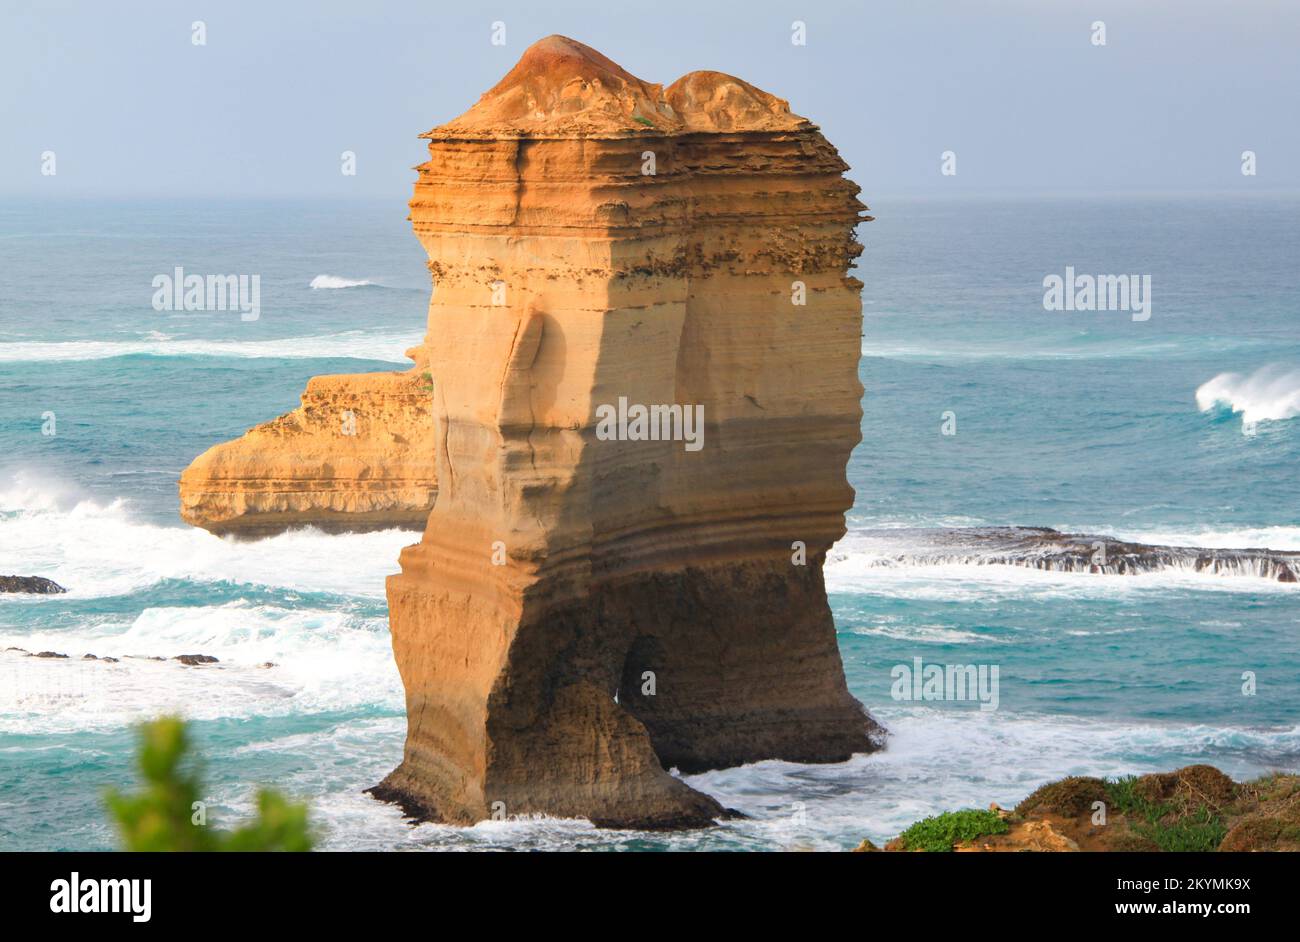 One of the twelve apostles on the Great Ocean Road south of Australia. Surrounded by high waves, he defies the mighty forces of nature Stock Photo